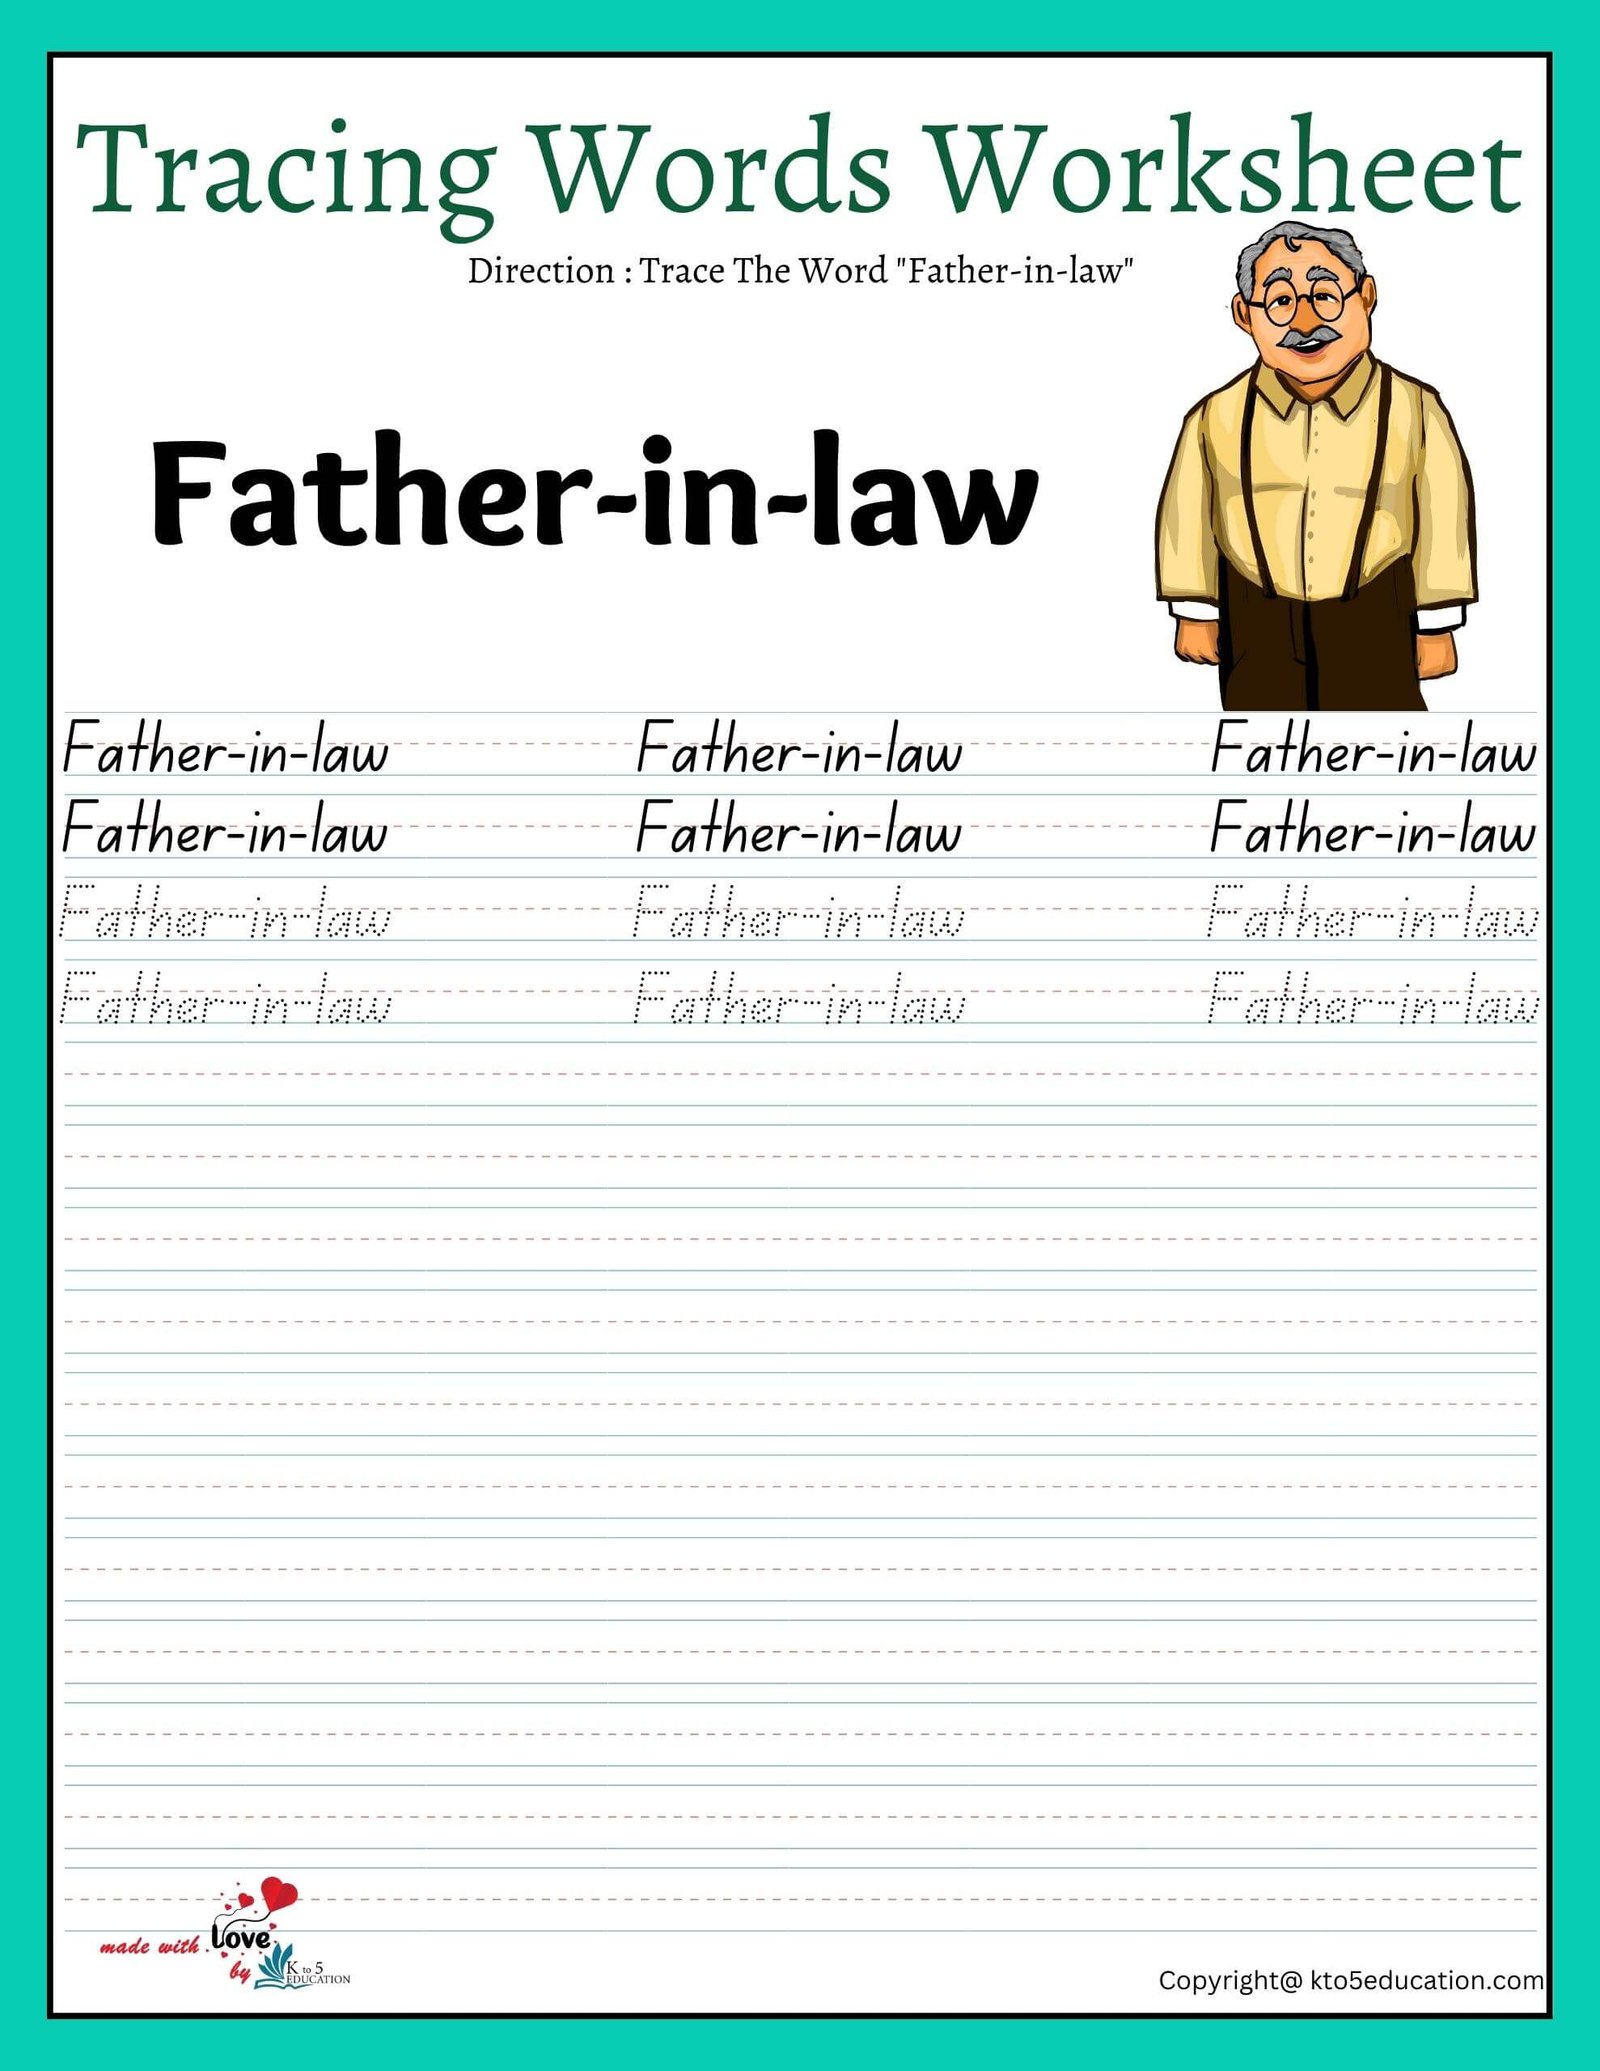 Family Tracing Words Worksheet Father-in-law